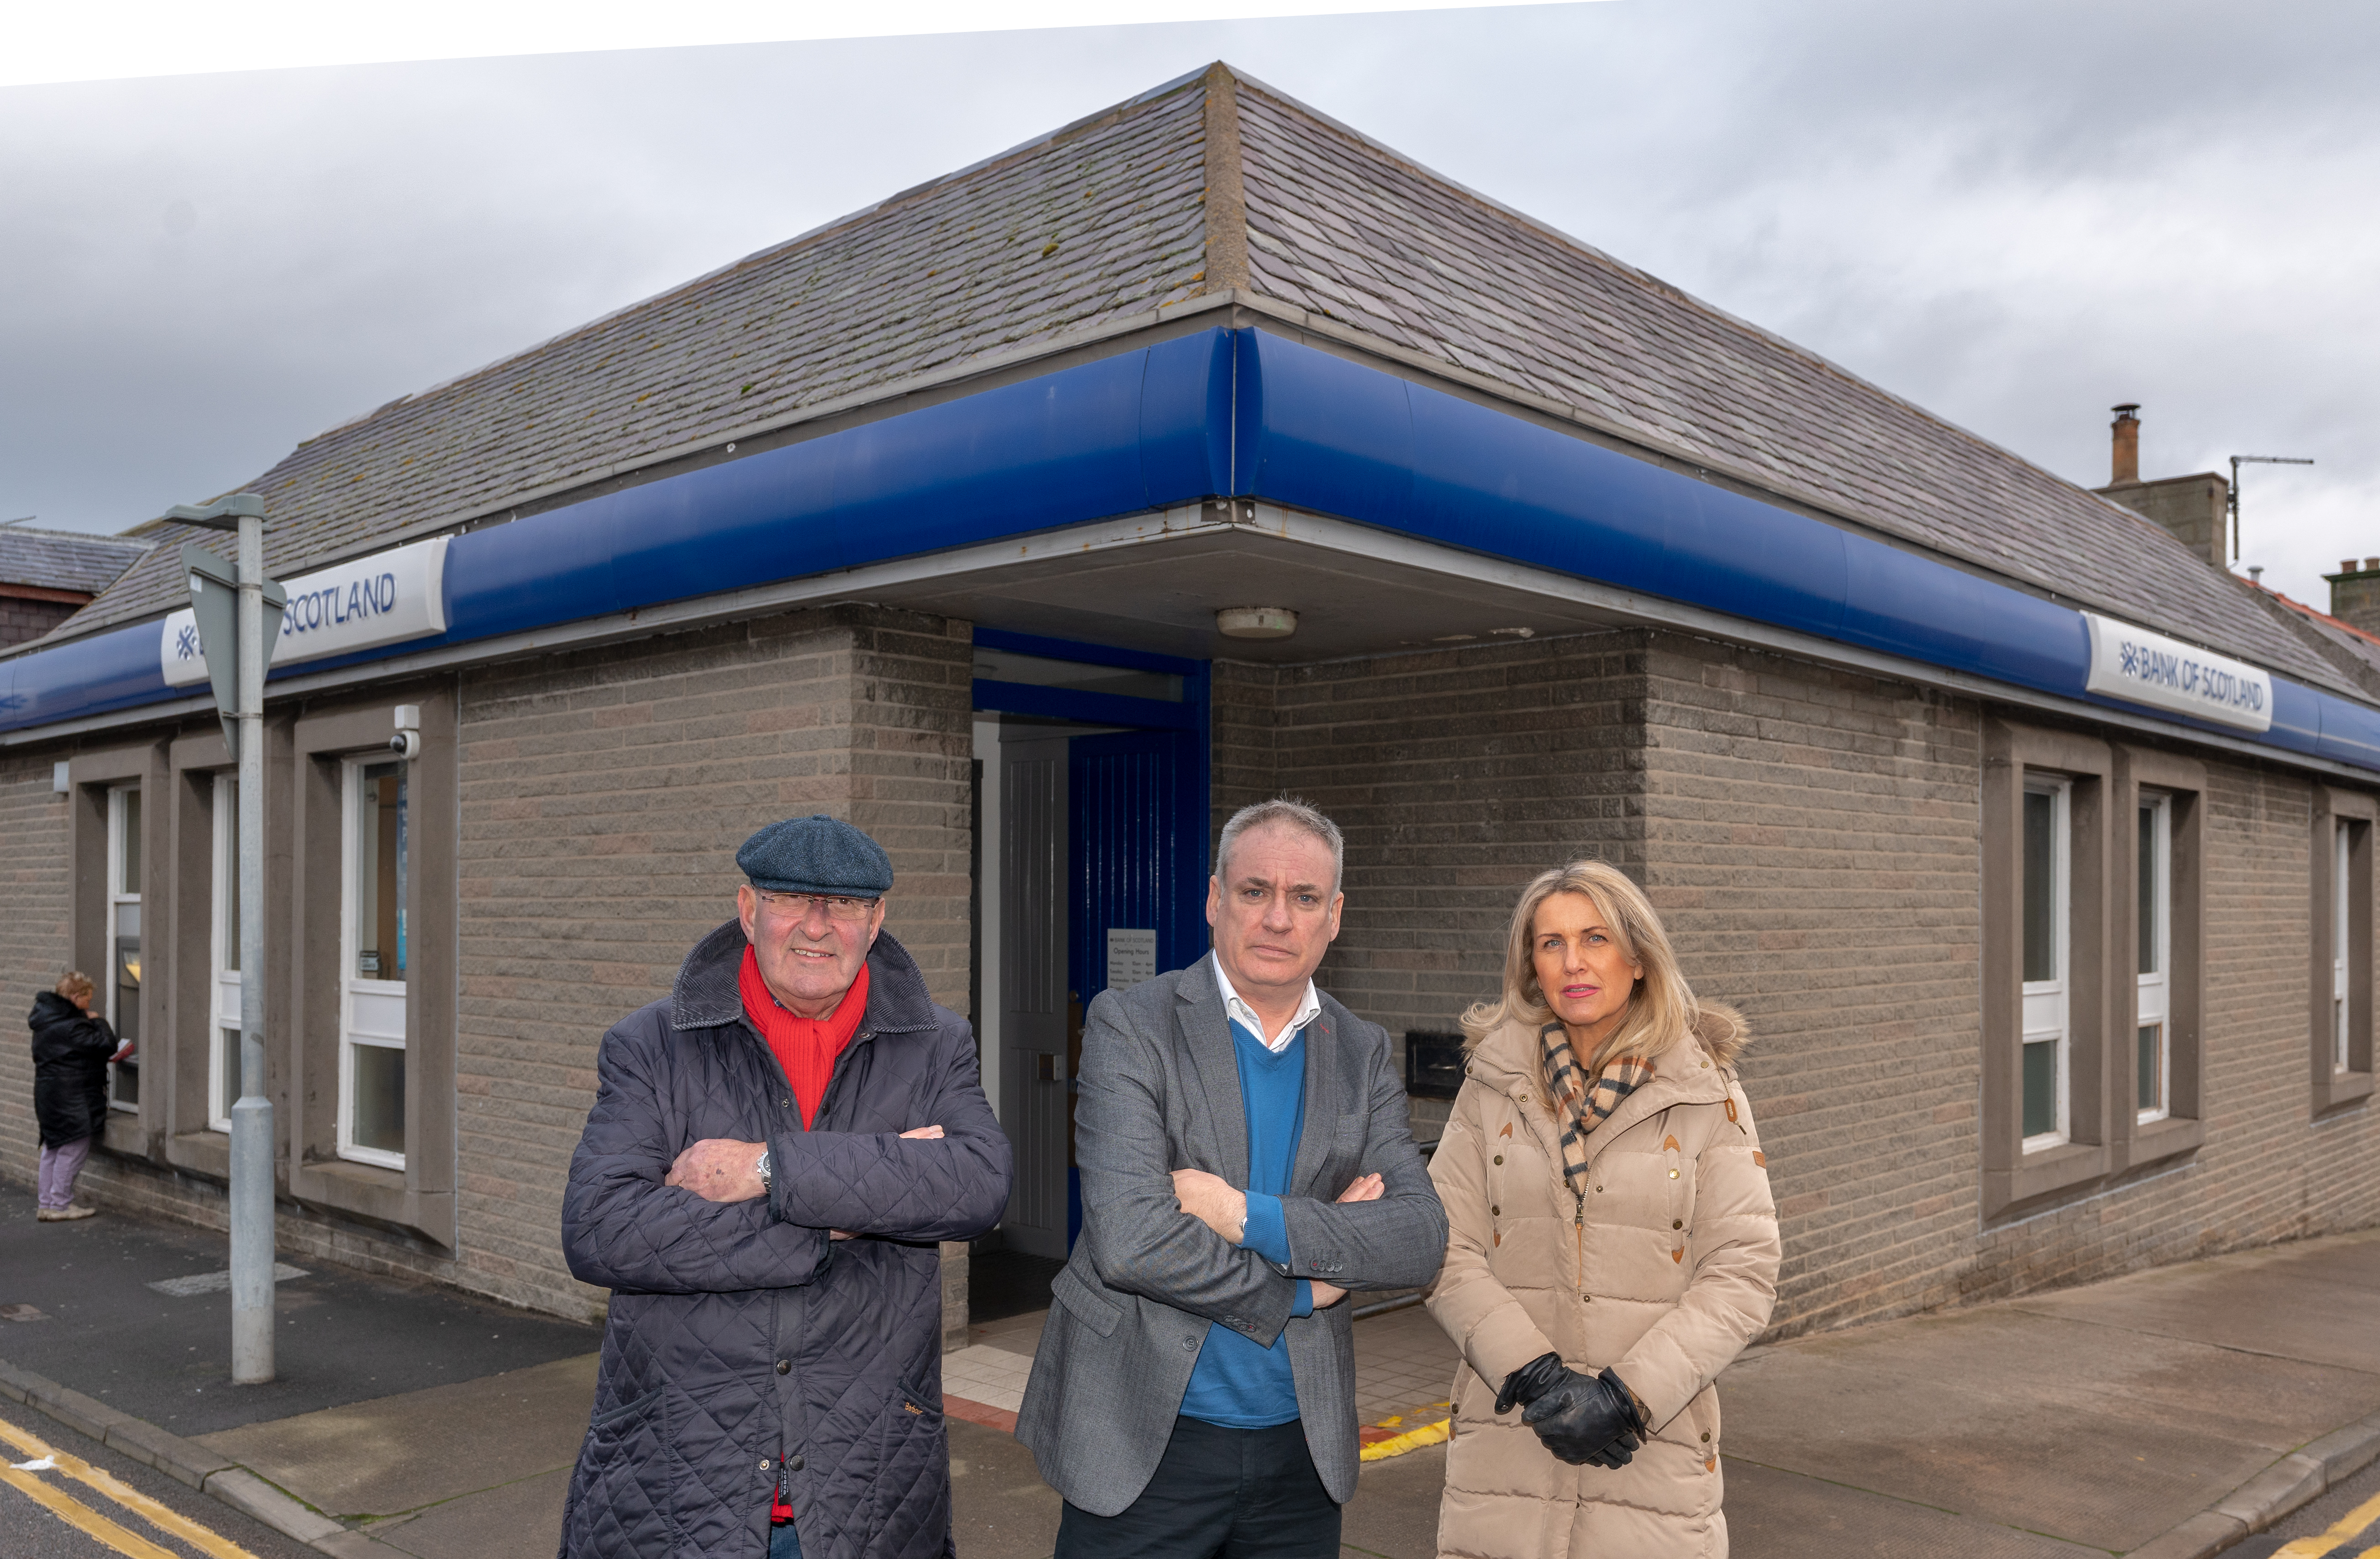 Moray MSP Richard Lochhead with Lossiemouth Community Council chairman Mike Mulholland and vice-chairwoman Carolle Ralph outside the Bank of Scotland in Lossiemouth